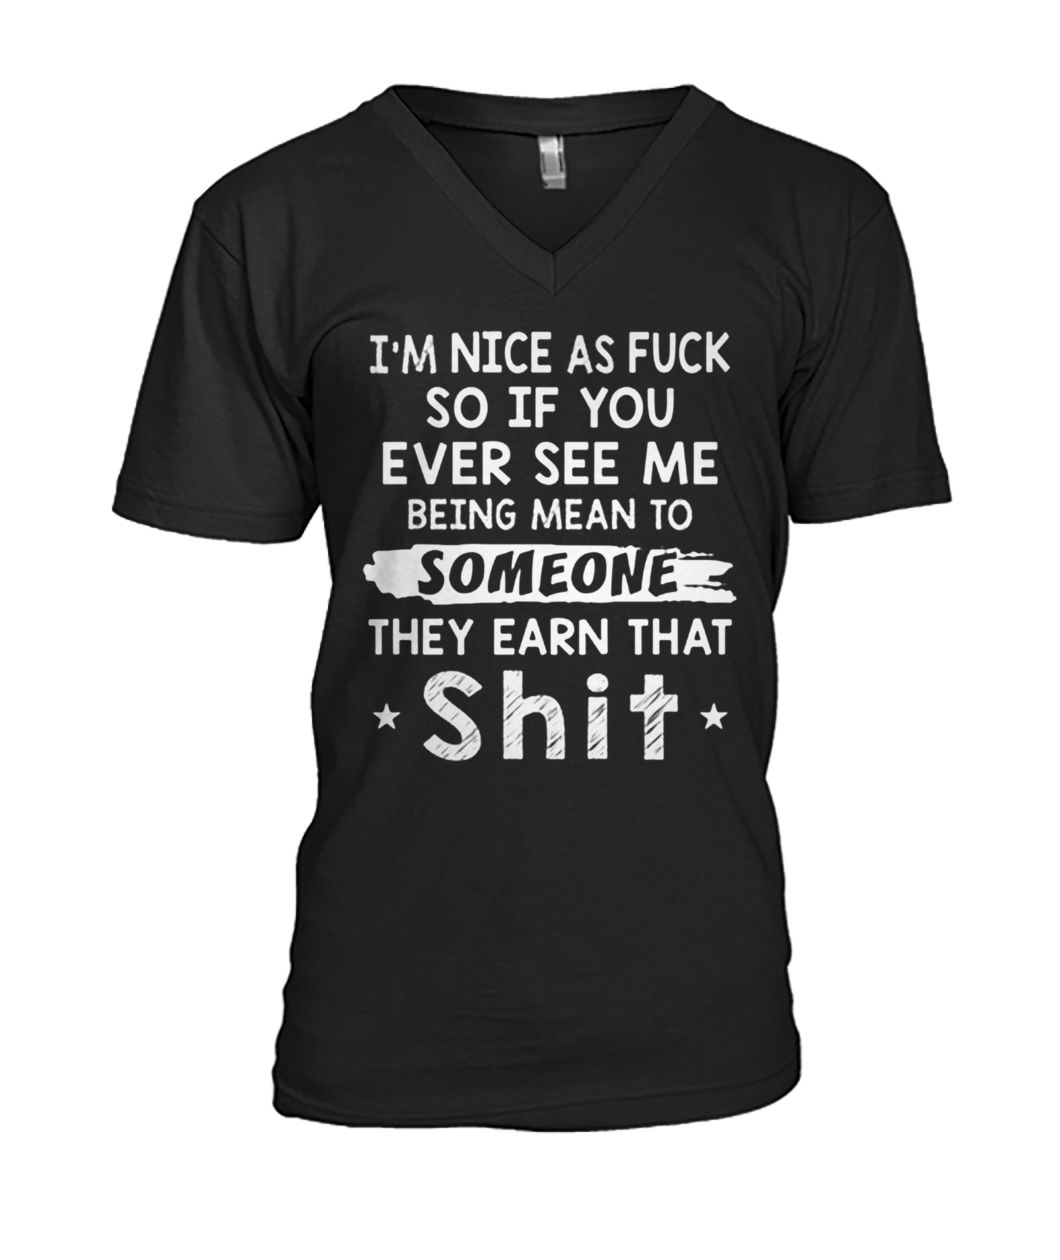 I’m nice as fuck so if you ever see me being mean to someone they earned that shit mens v-neck